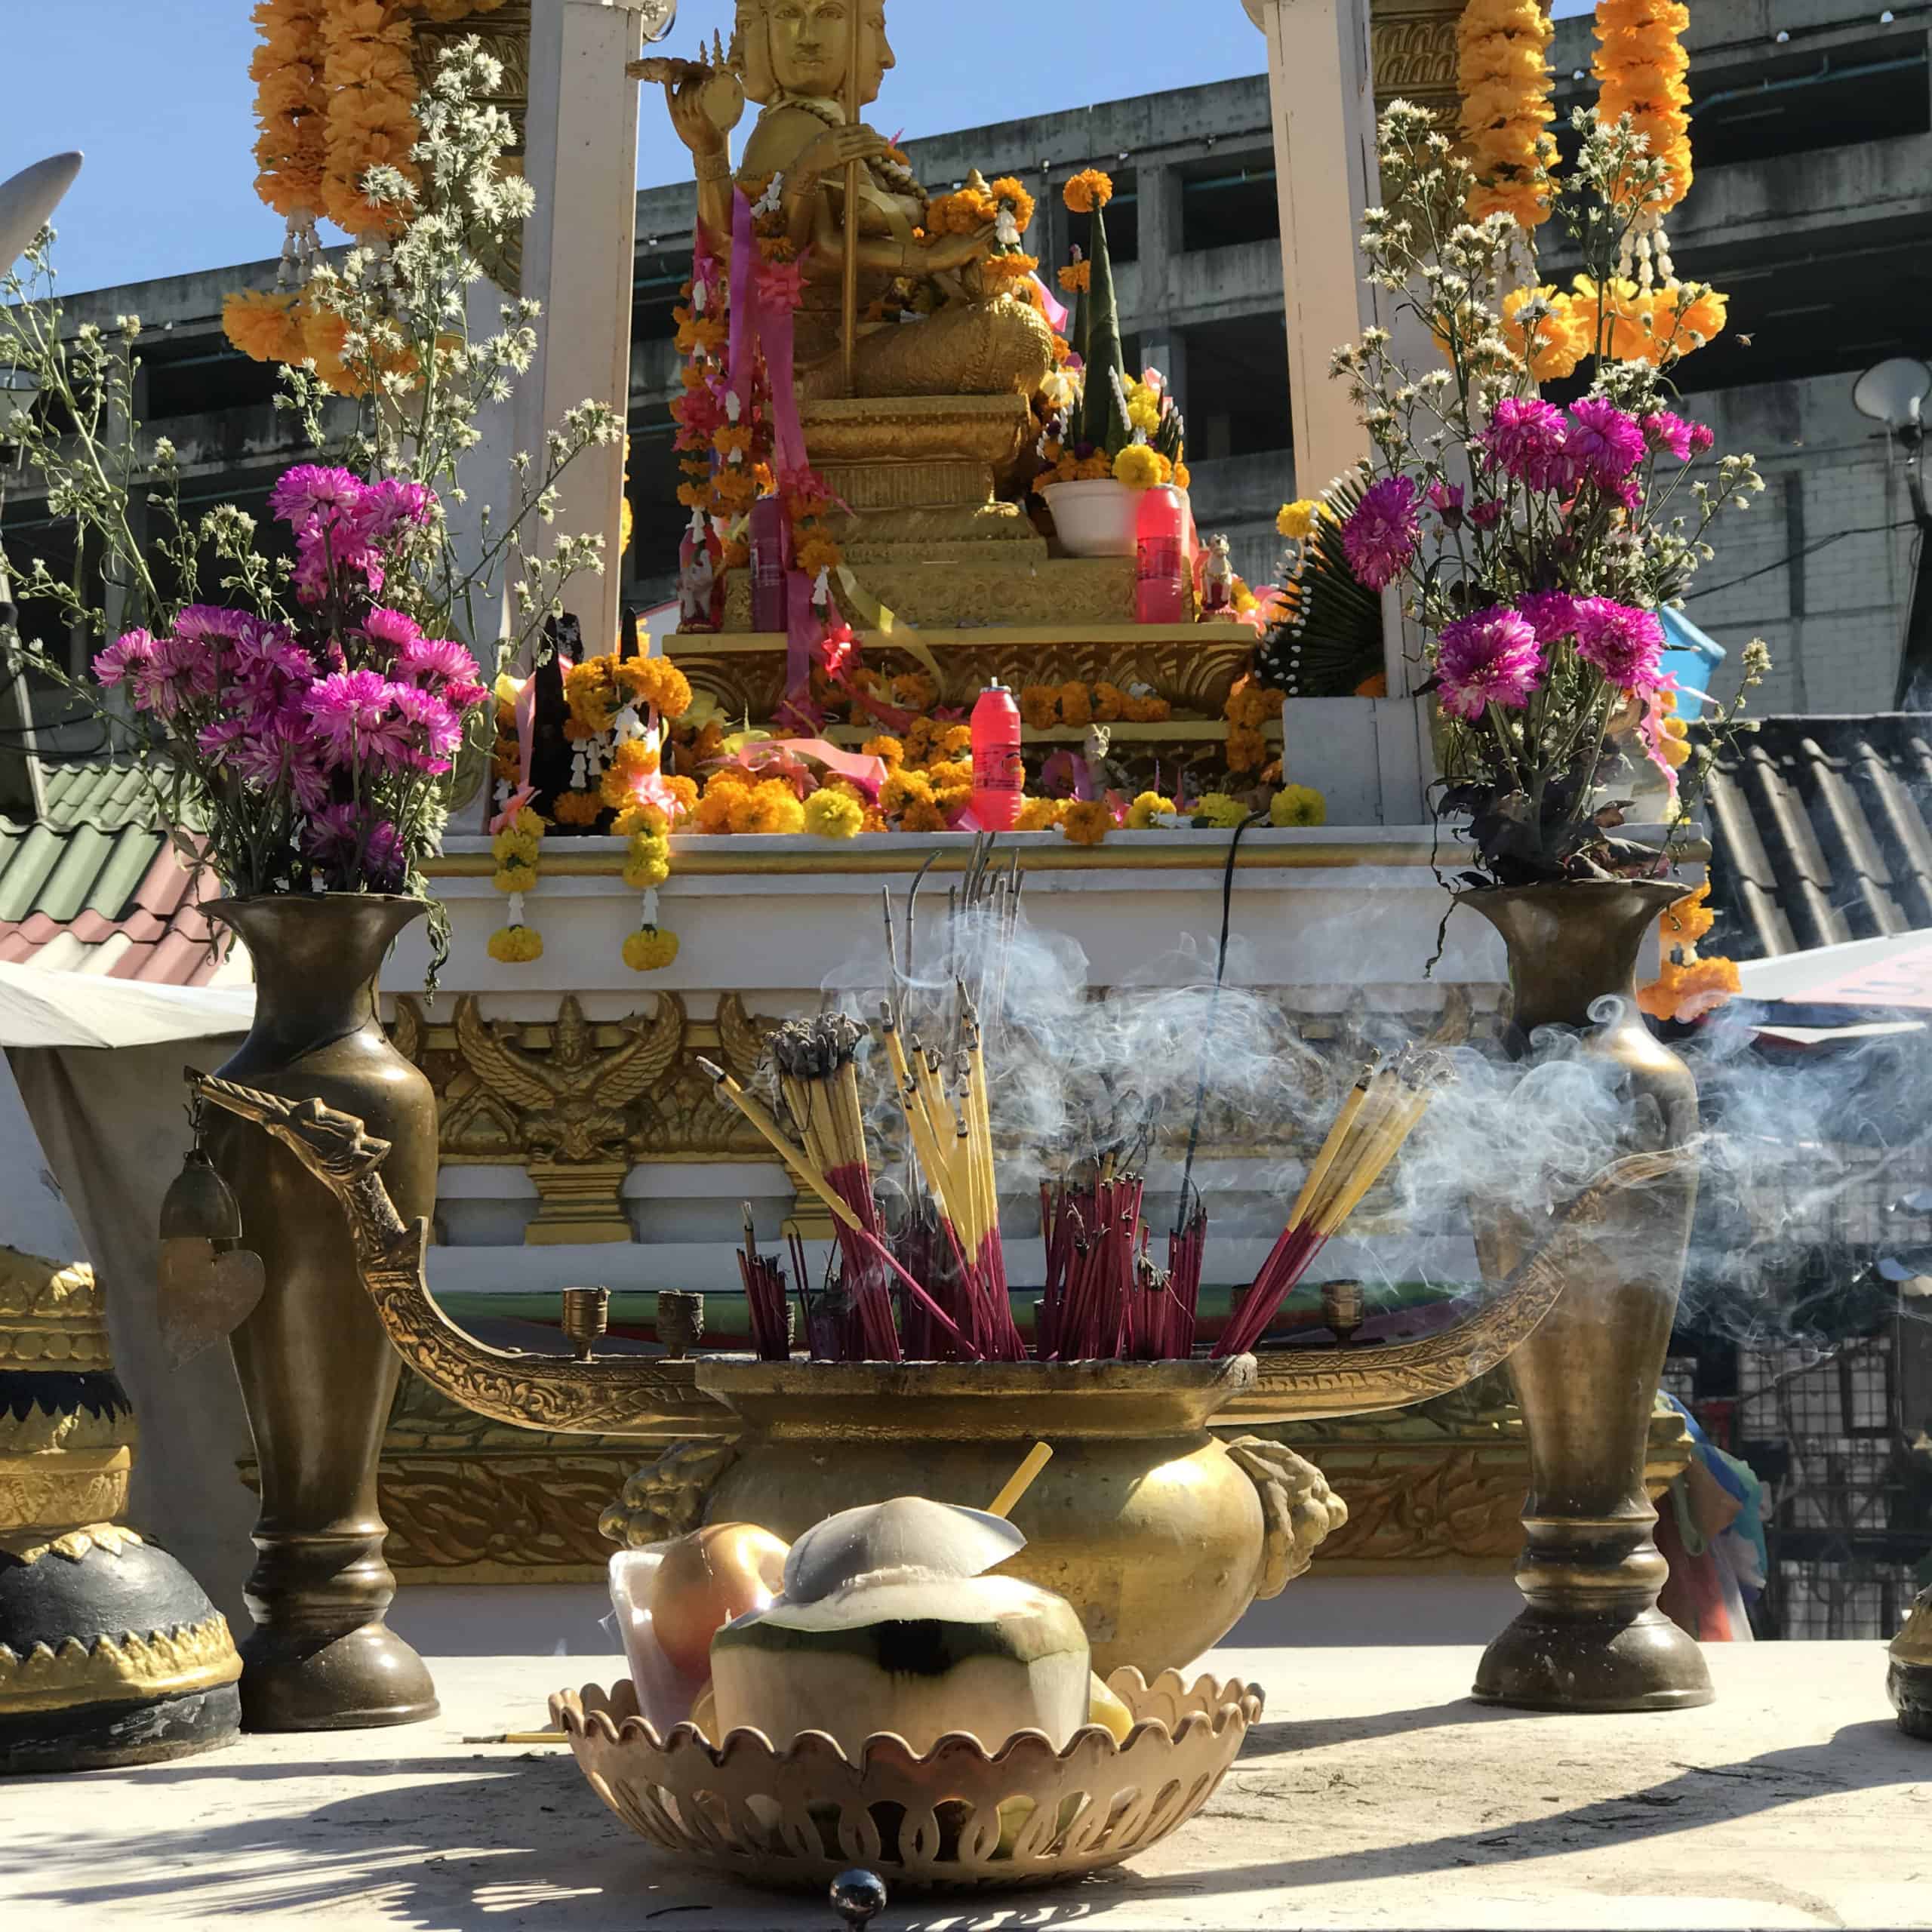 a spirit house at the weekend market filled with flowers, incense and candles.